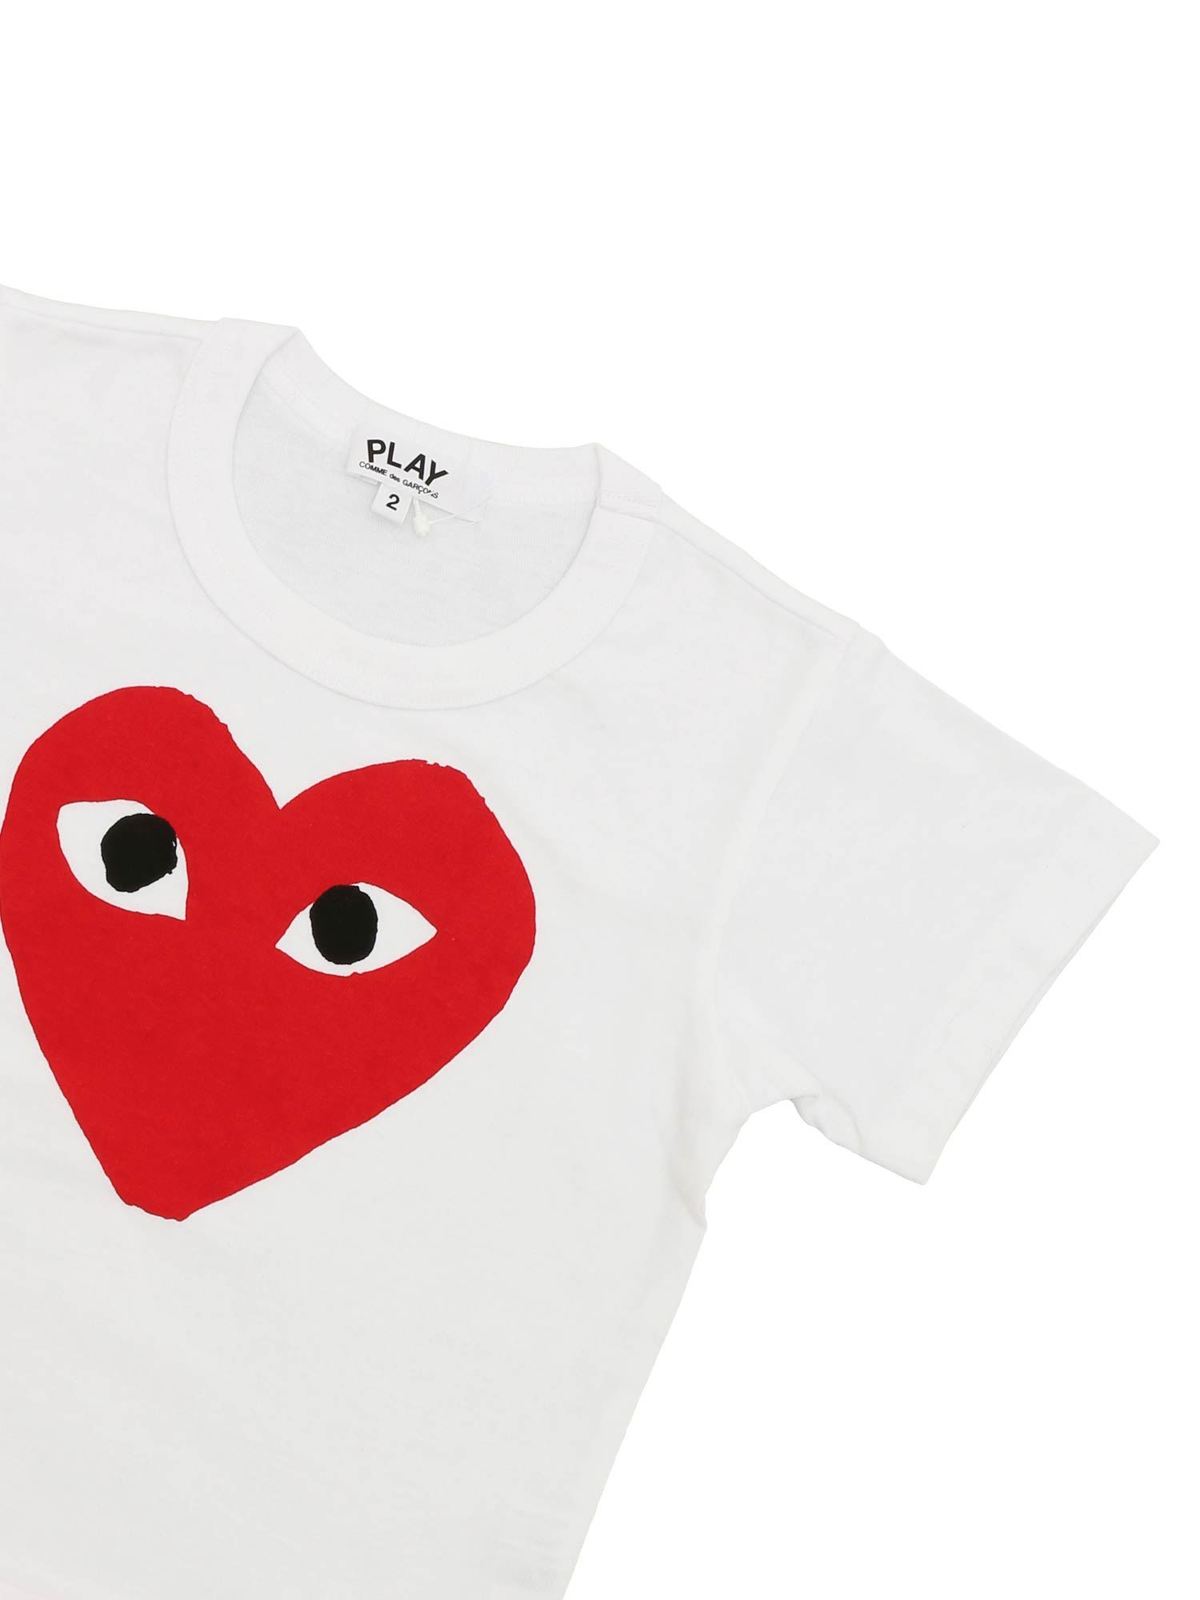 red and white comme des garcons shirt